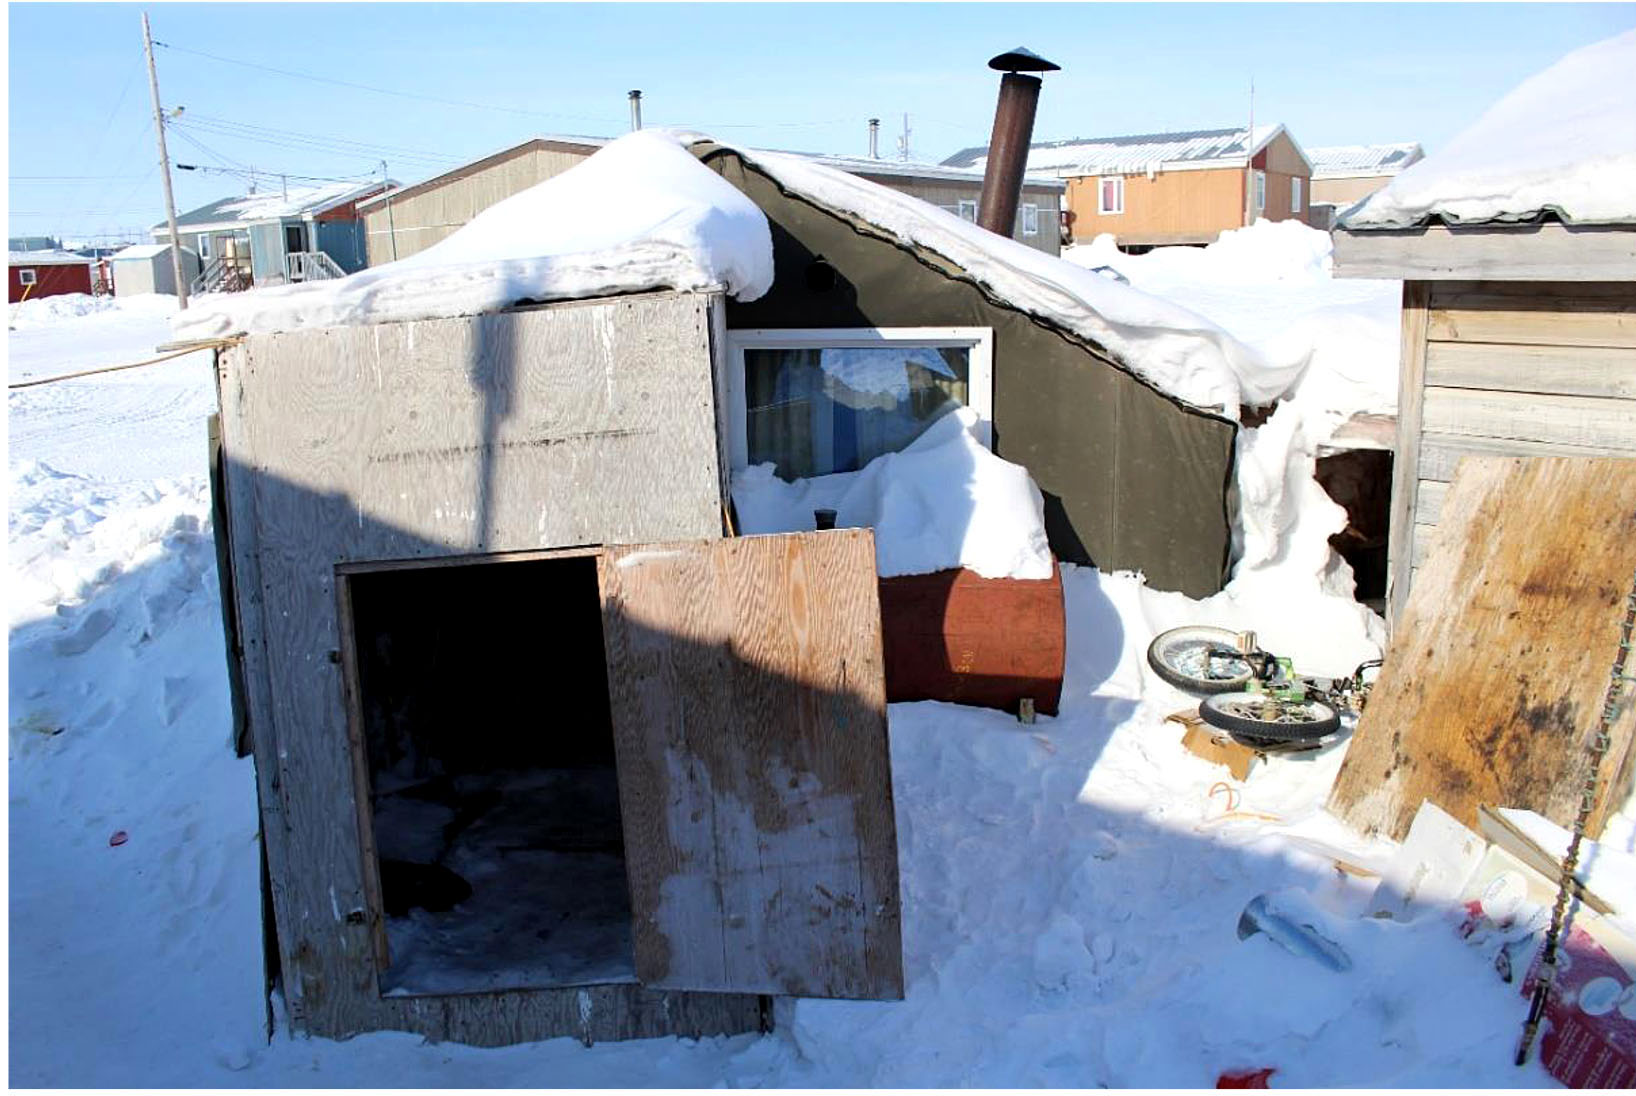 This poorly constructed wooden shed in Igloolik housed a young family at the time the photo was taken. On March 1, a Senate committee report said the housing shortages that plague the four regions of Inuit Nunangat represent a public health emergency, but Finance Minister Bill Morneau's March 22 budget pledges only about $21.8 million a year over 11 years for housing in Nunavut. (IMAGE FROM SENATE COMMITTEE REPORT) 